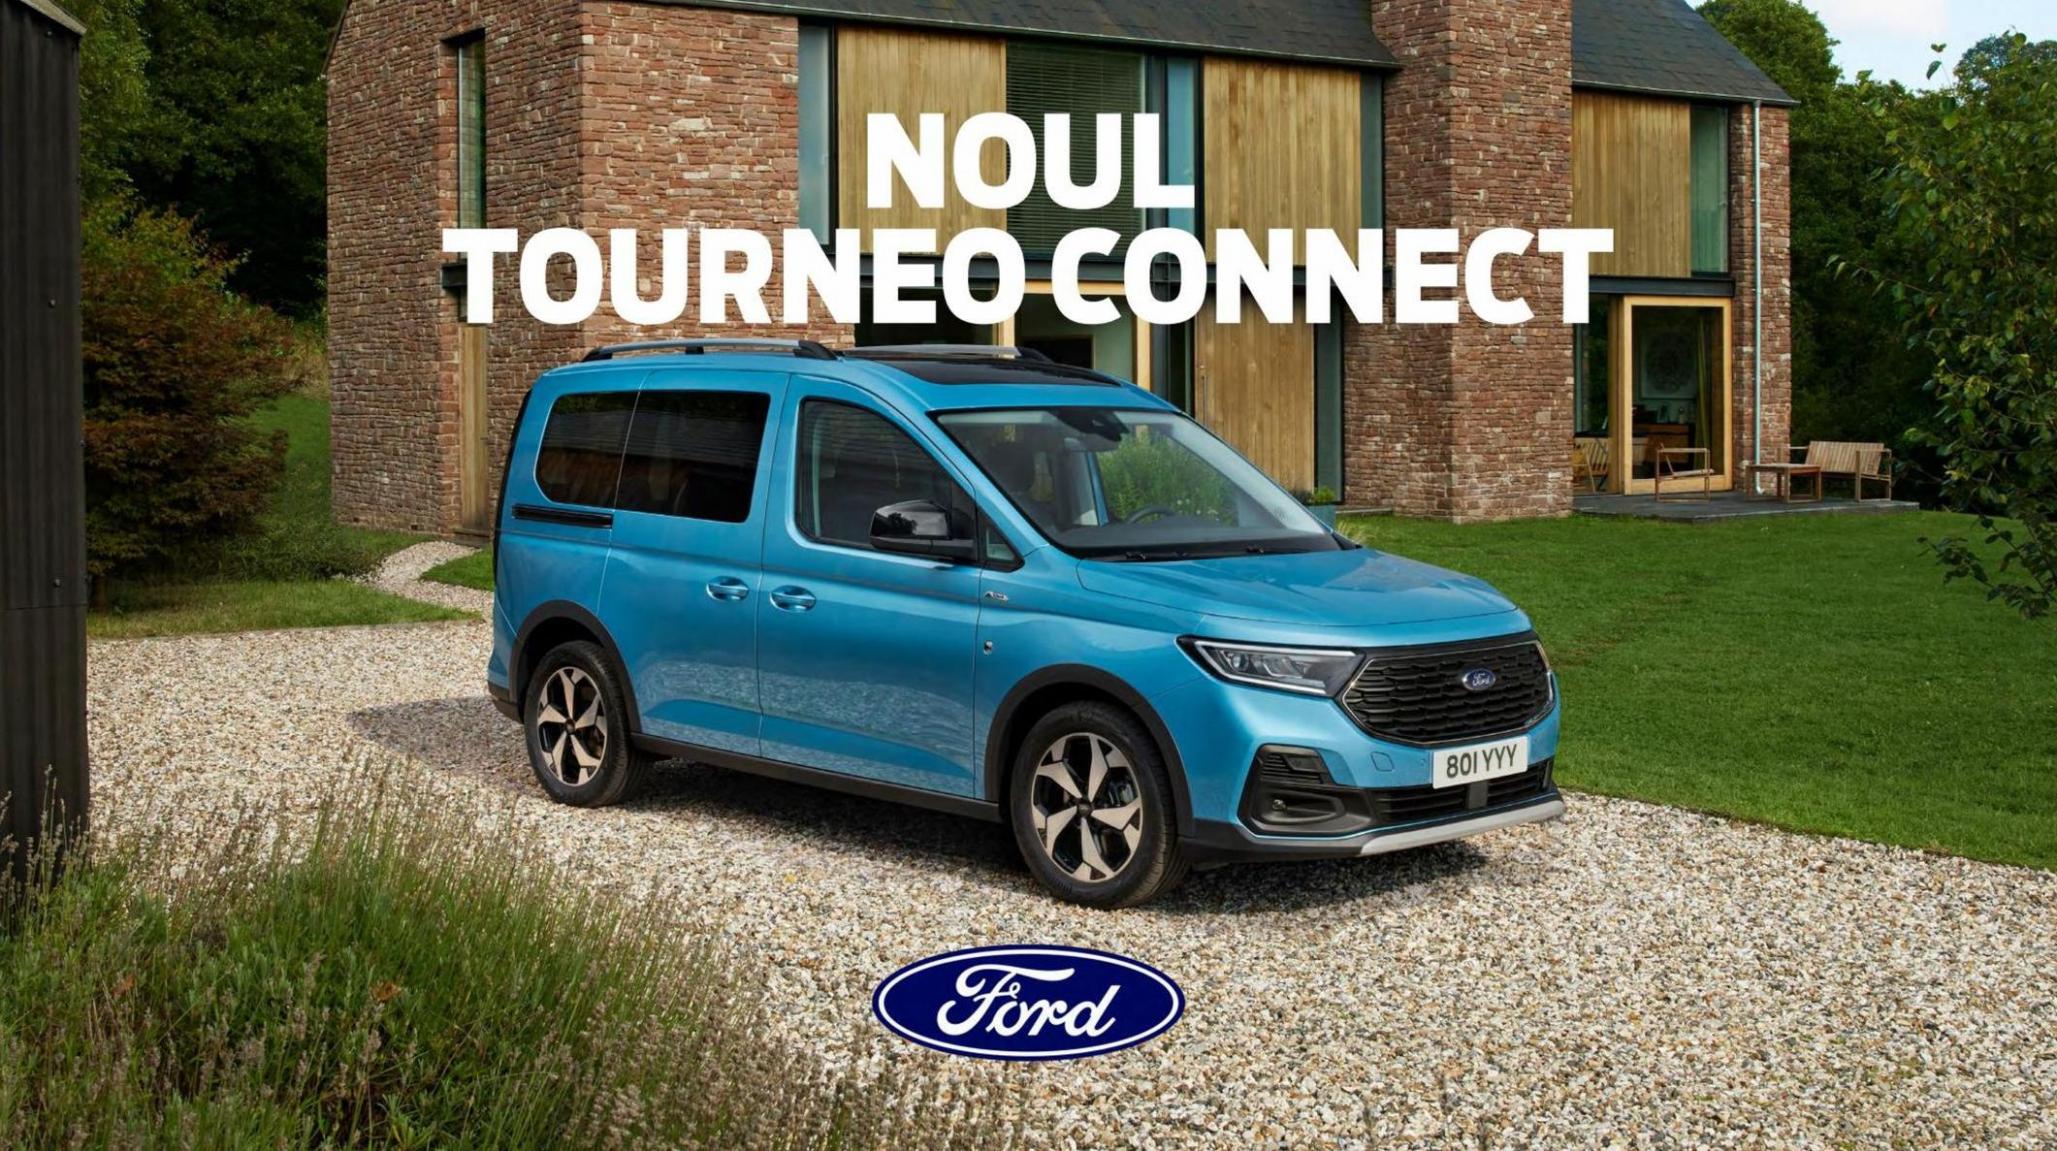 Noul Tourneo Connect. Ford (2024-07-04-2024-07-04)